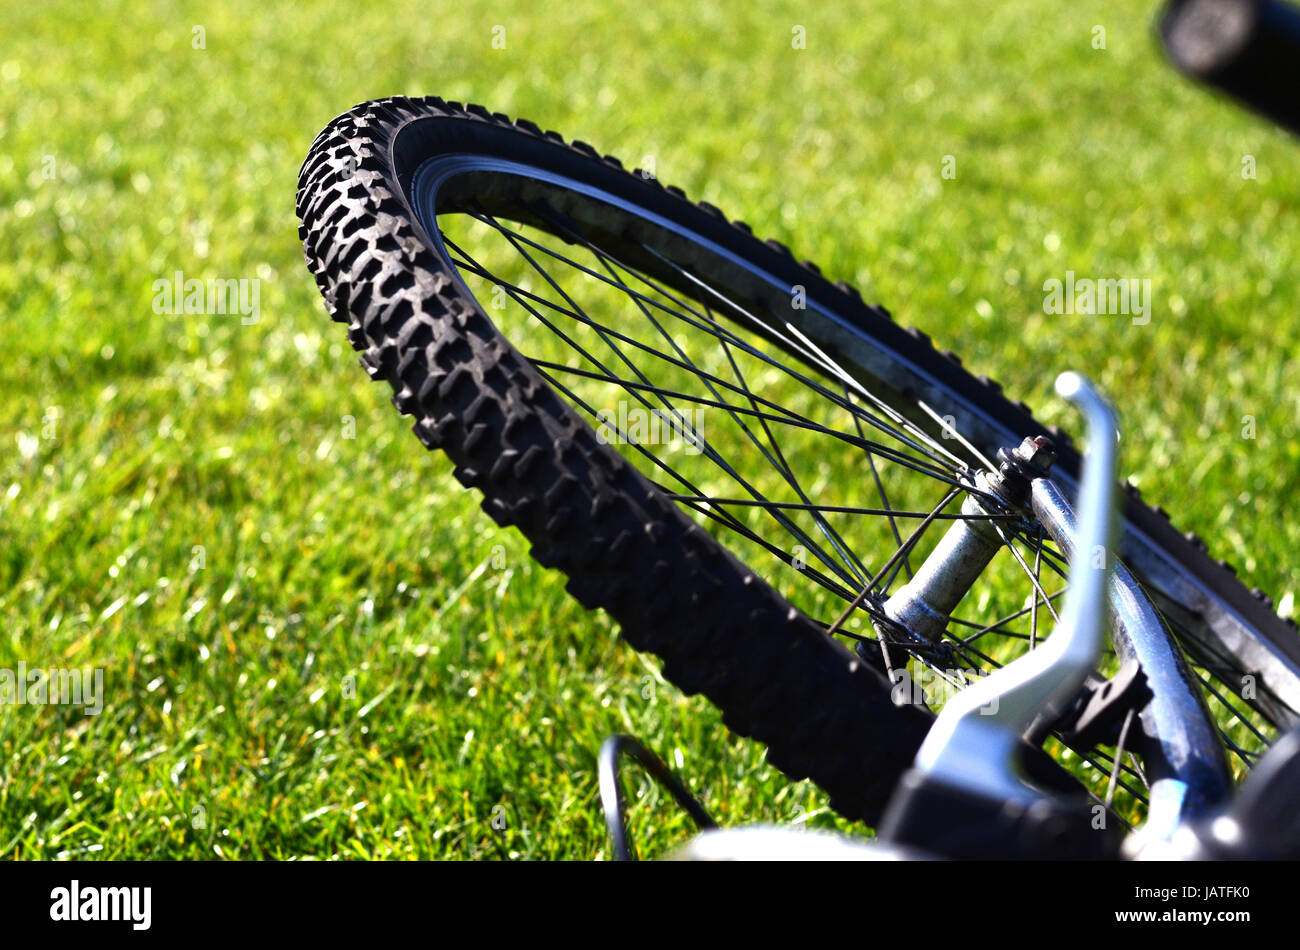 Close up of a Bicycle Wheel contrasting with the grass Stock Photo